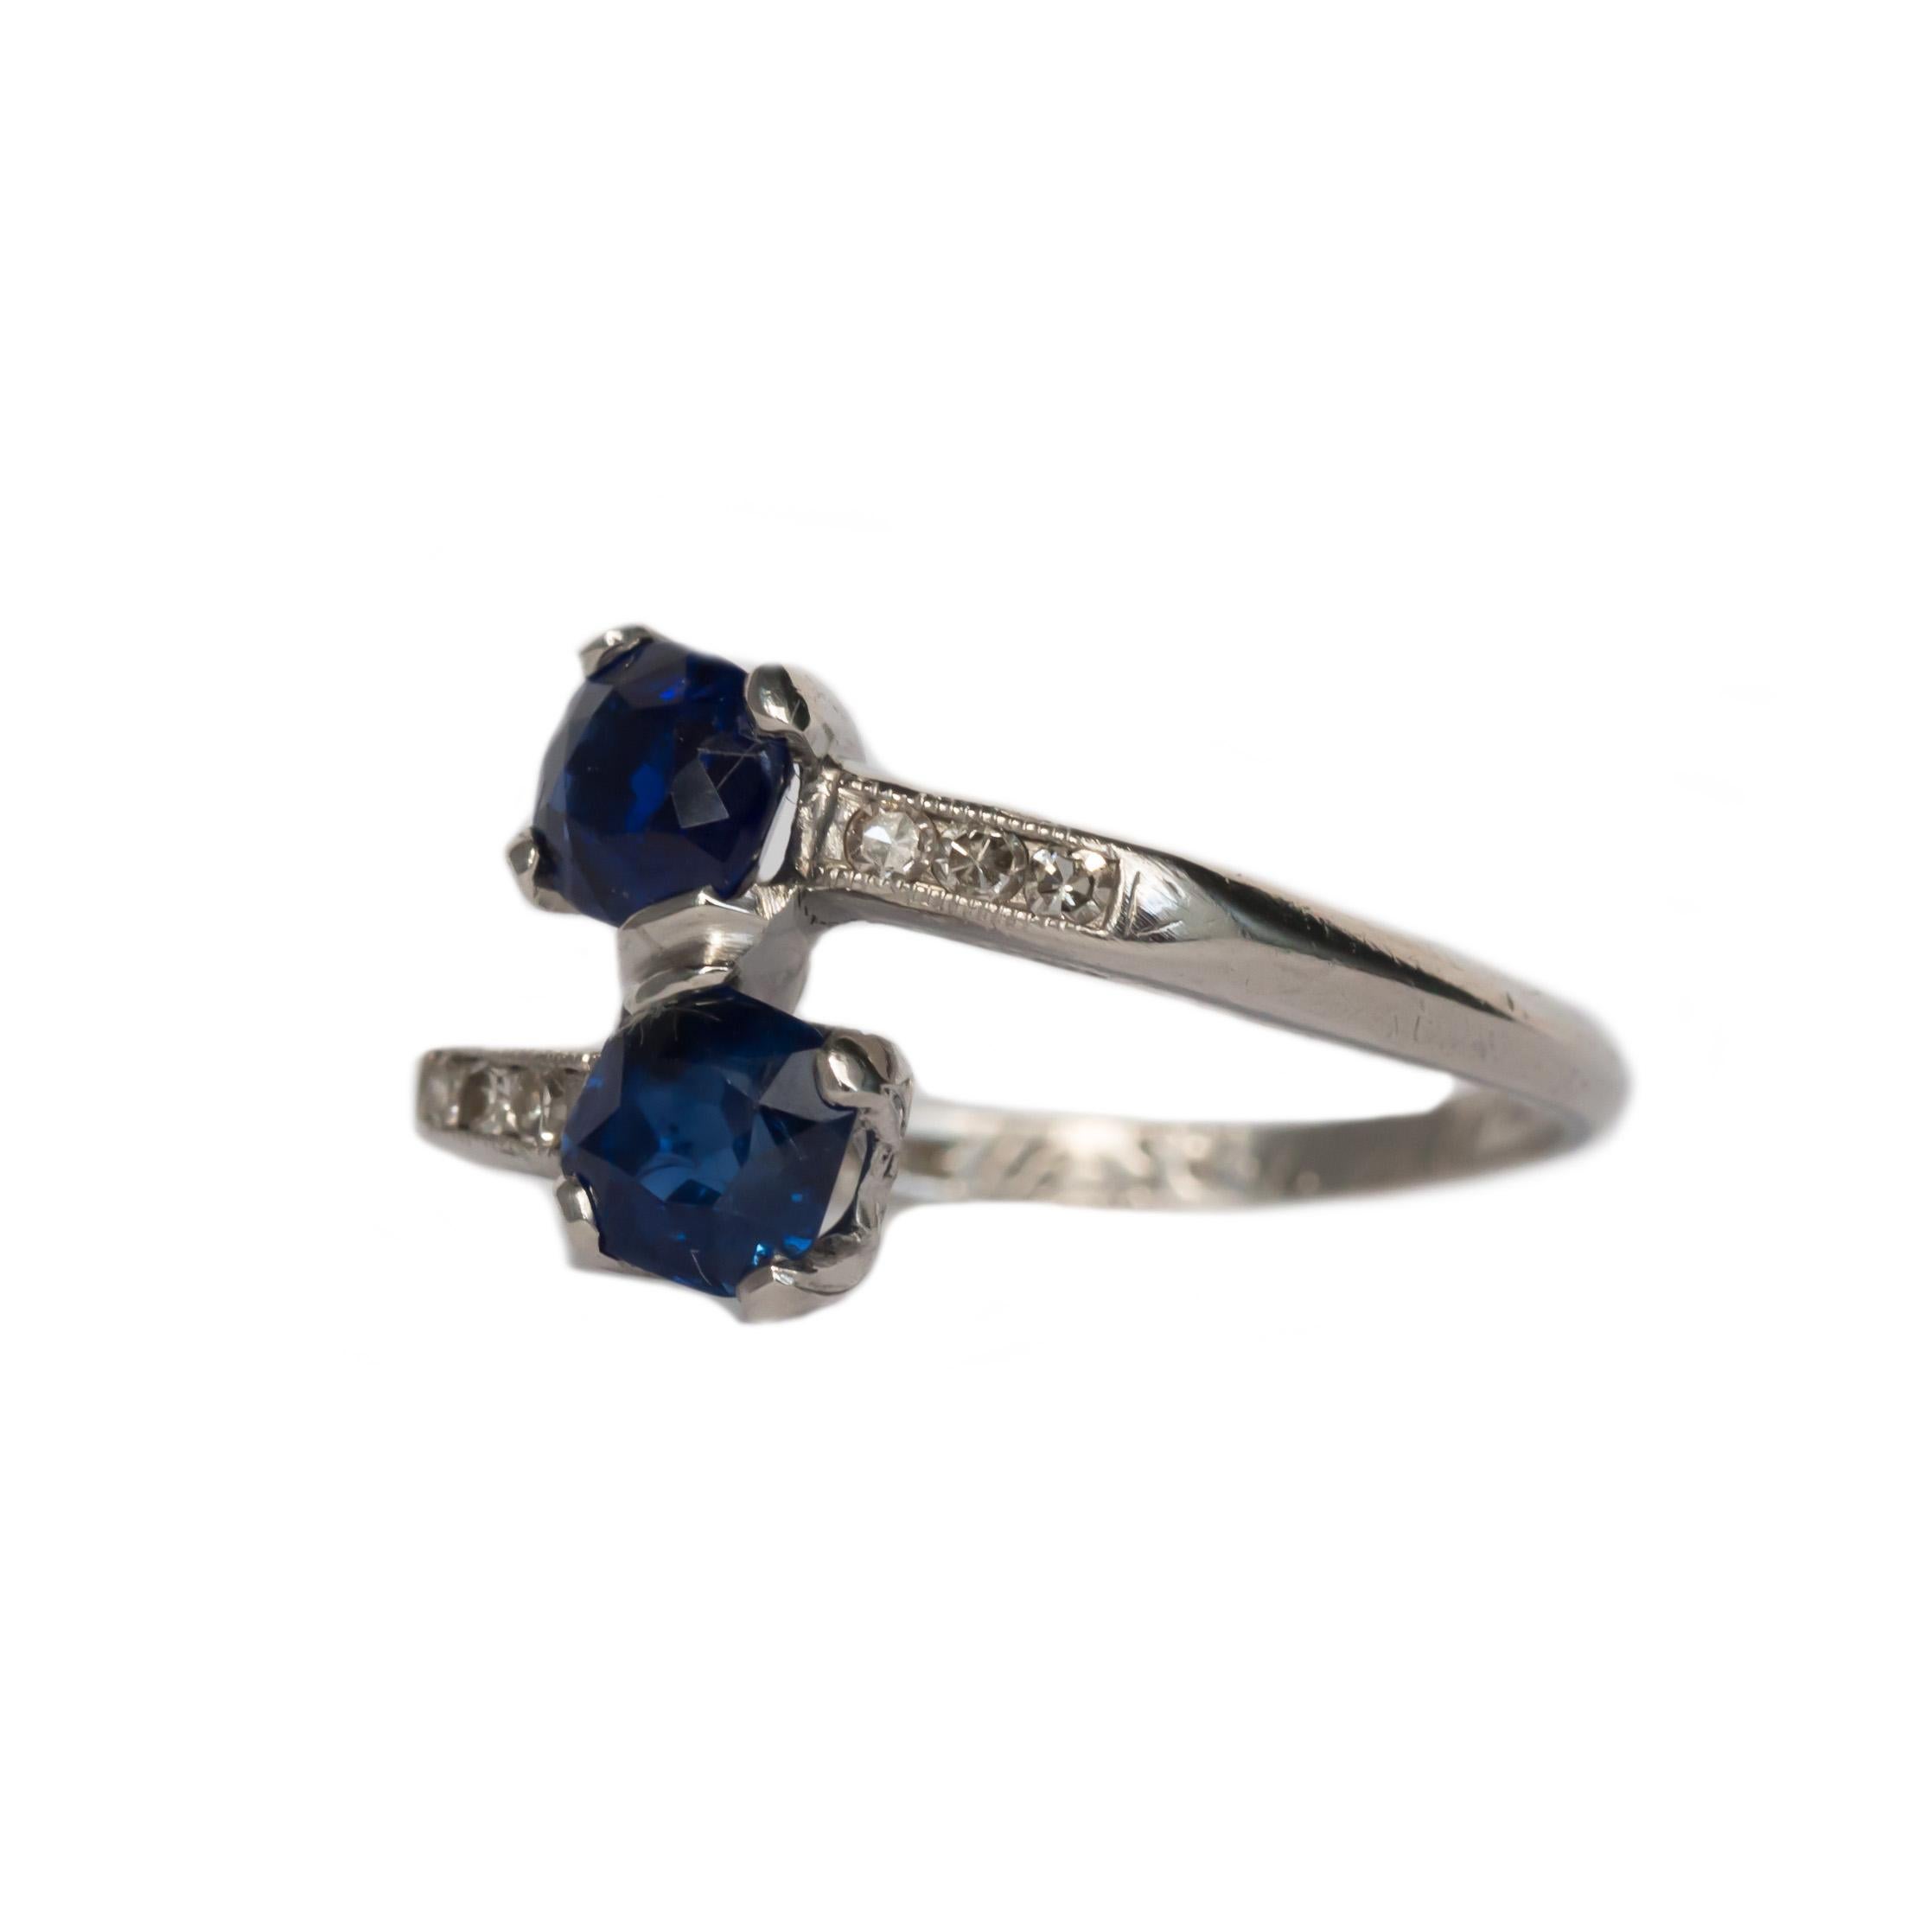 Ring Size: 6.50
Metal Type: Platinum
Weight: 3.9 grams

Center Diamond Details
GIA CERTIFIED Center Diamond - Certificate # 5201171087
Type: Natural Cambodia Sapphire 
Shape: Octagonal
Carat Weight: .71 carat
Color: Blue 

Color Stone Details: